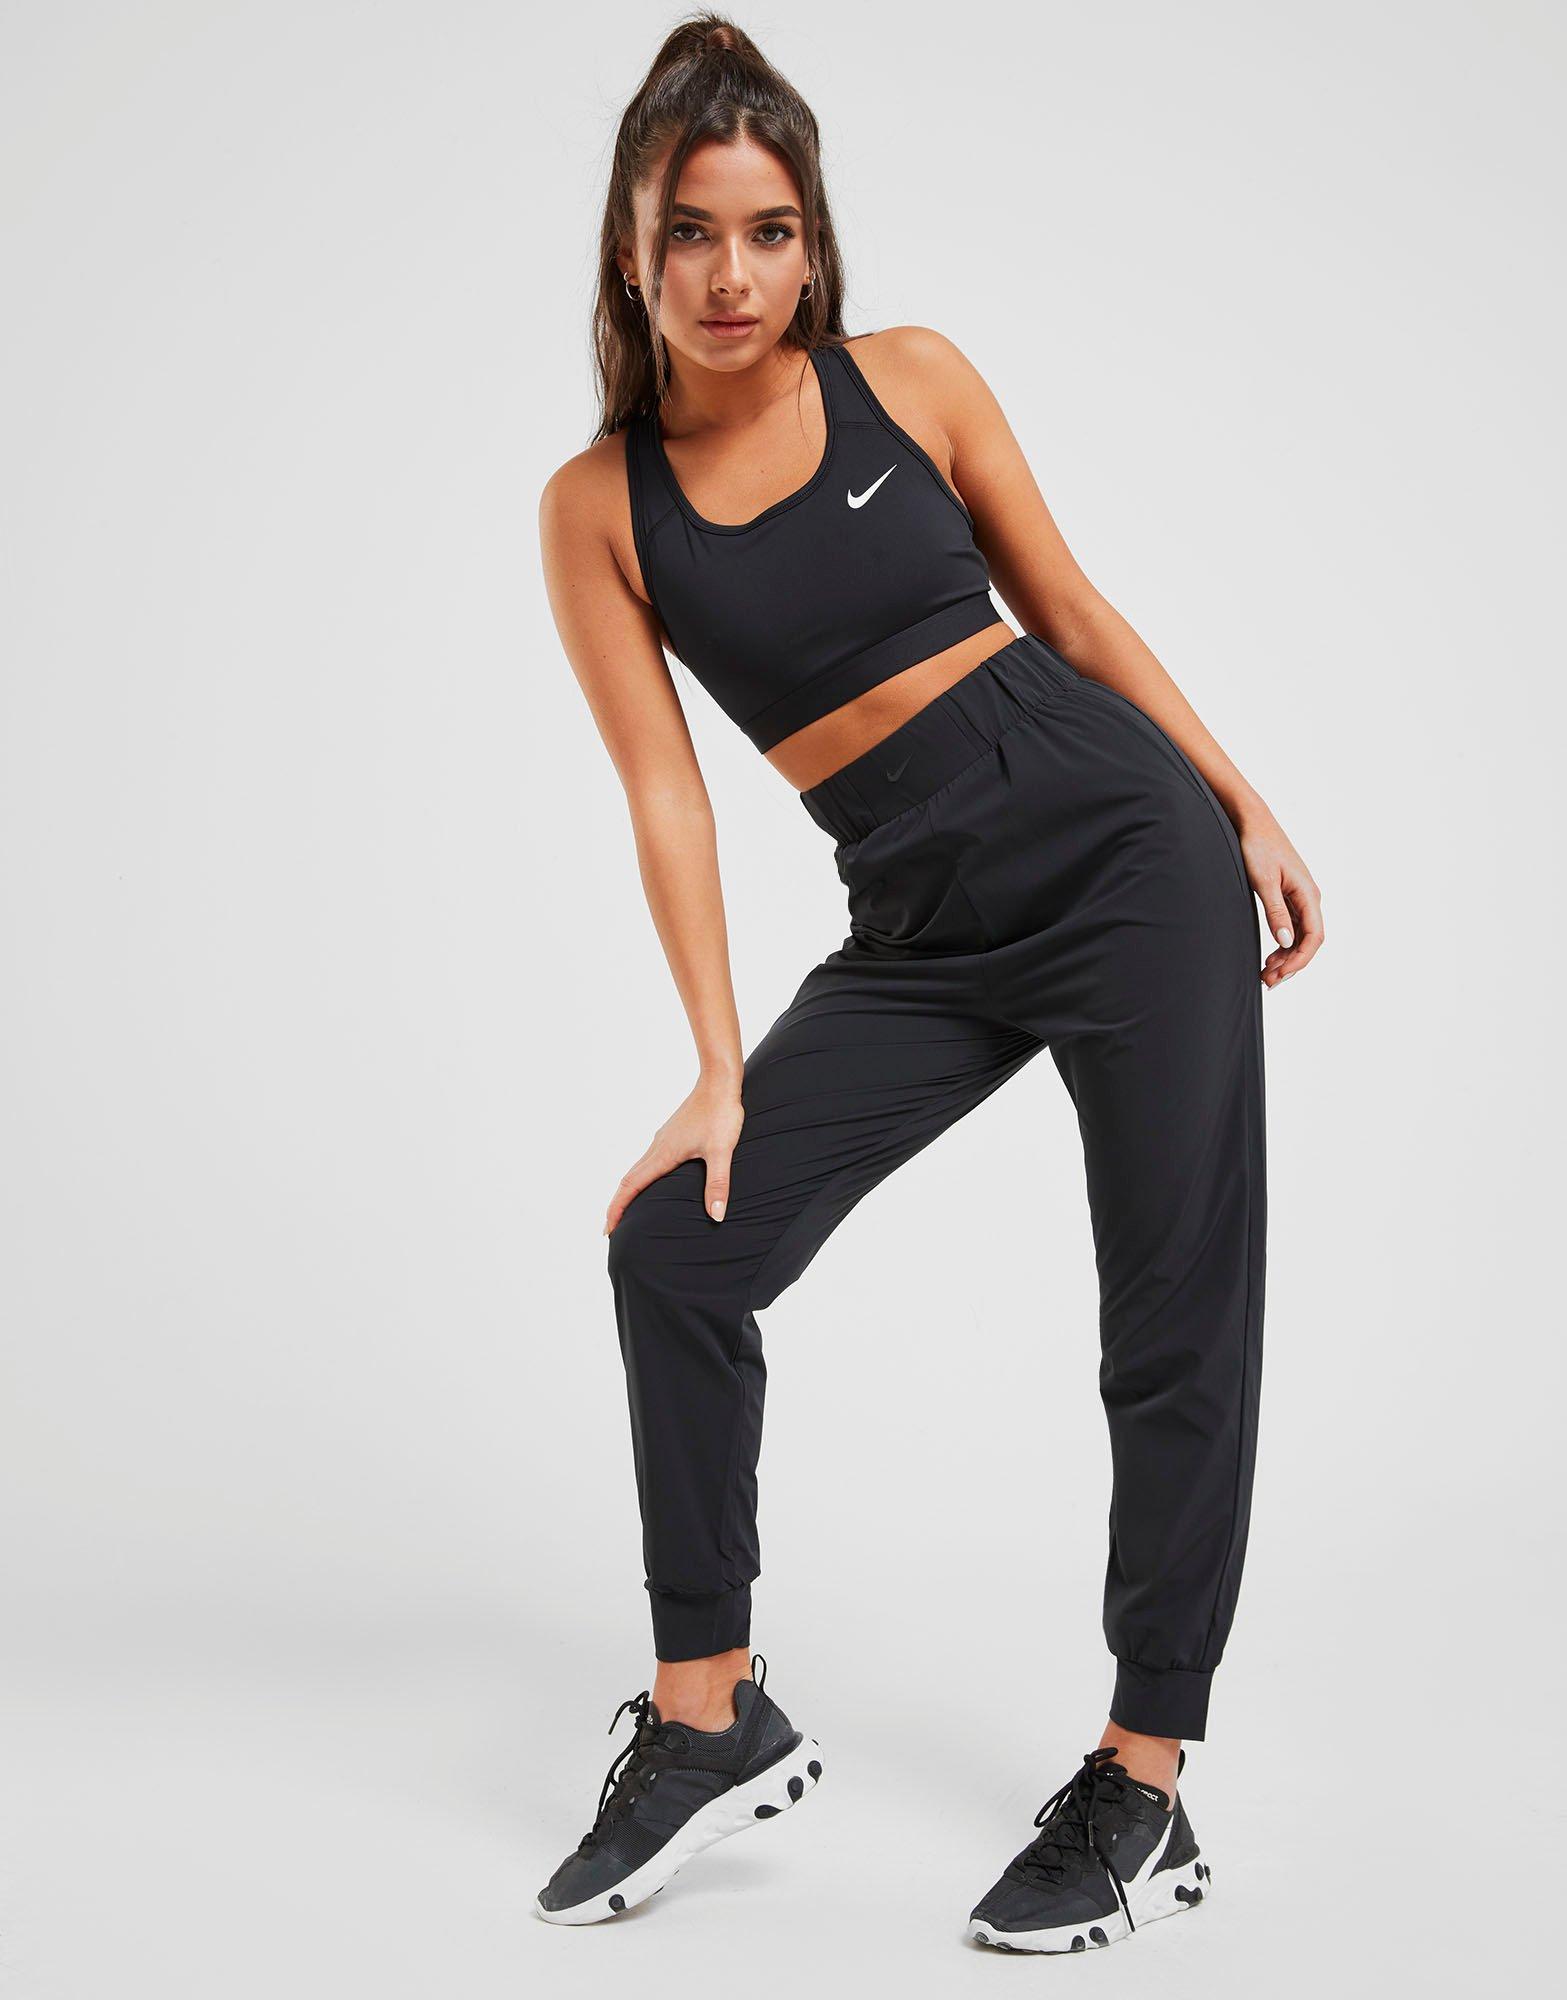 bliss lux training pants